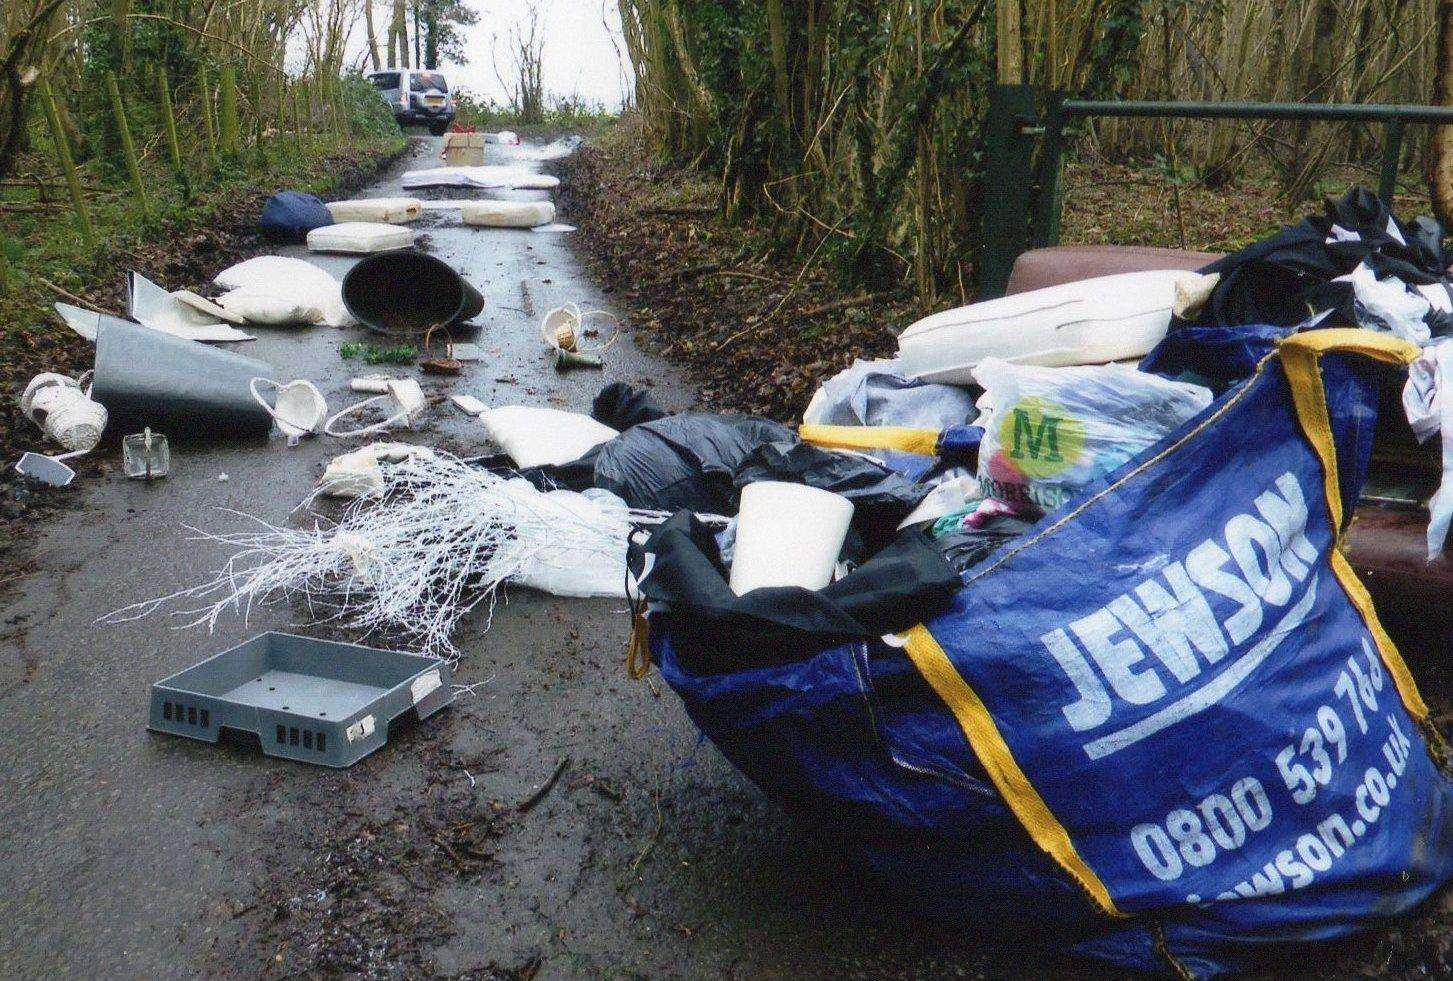 Fly-tipping in South Green Lane spotted by Pam Penfold who could not get by in her vehicle